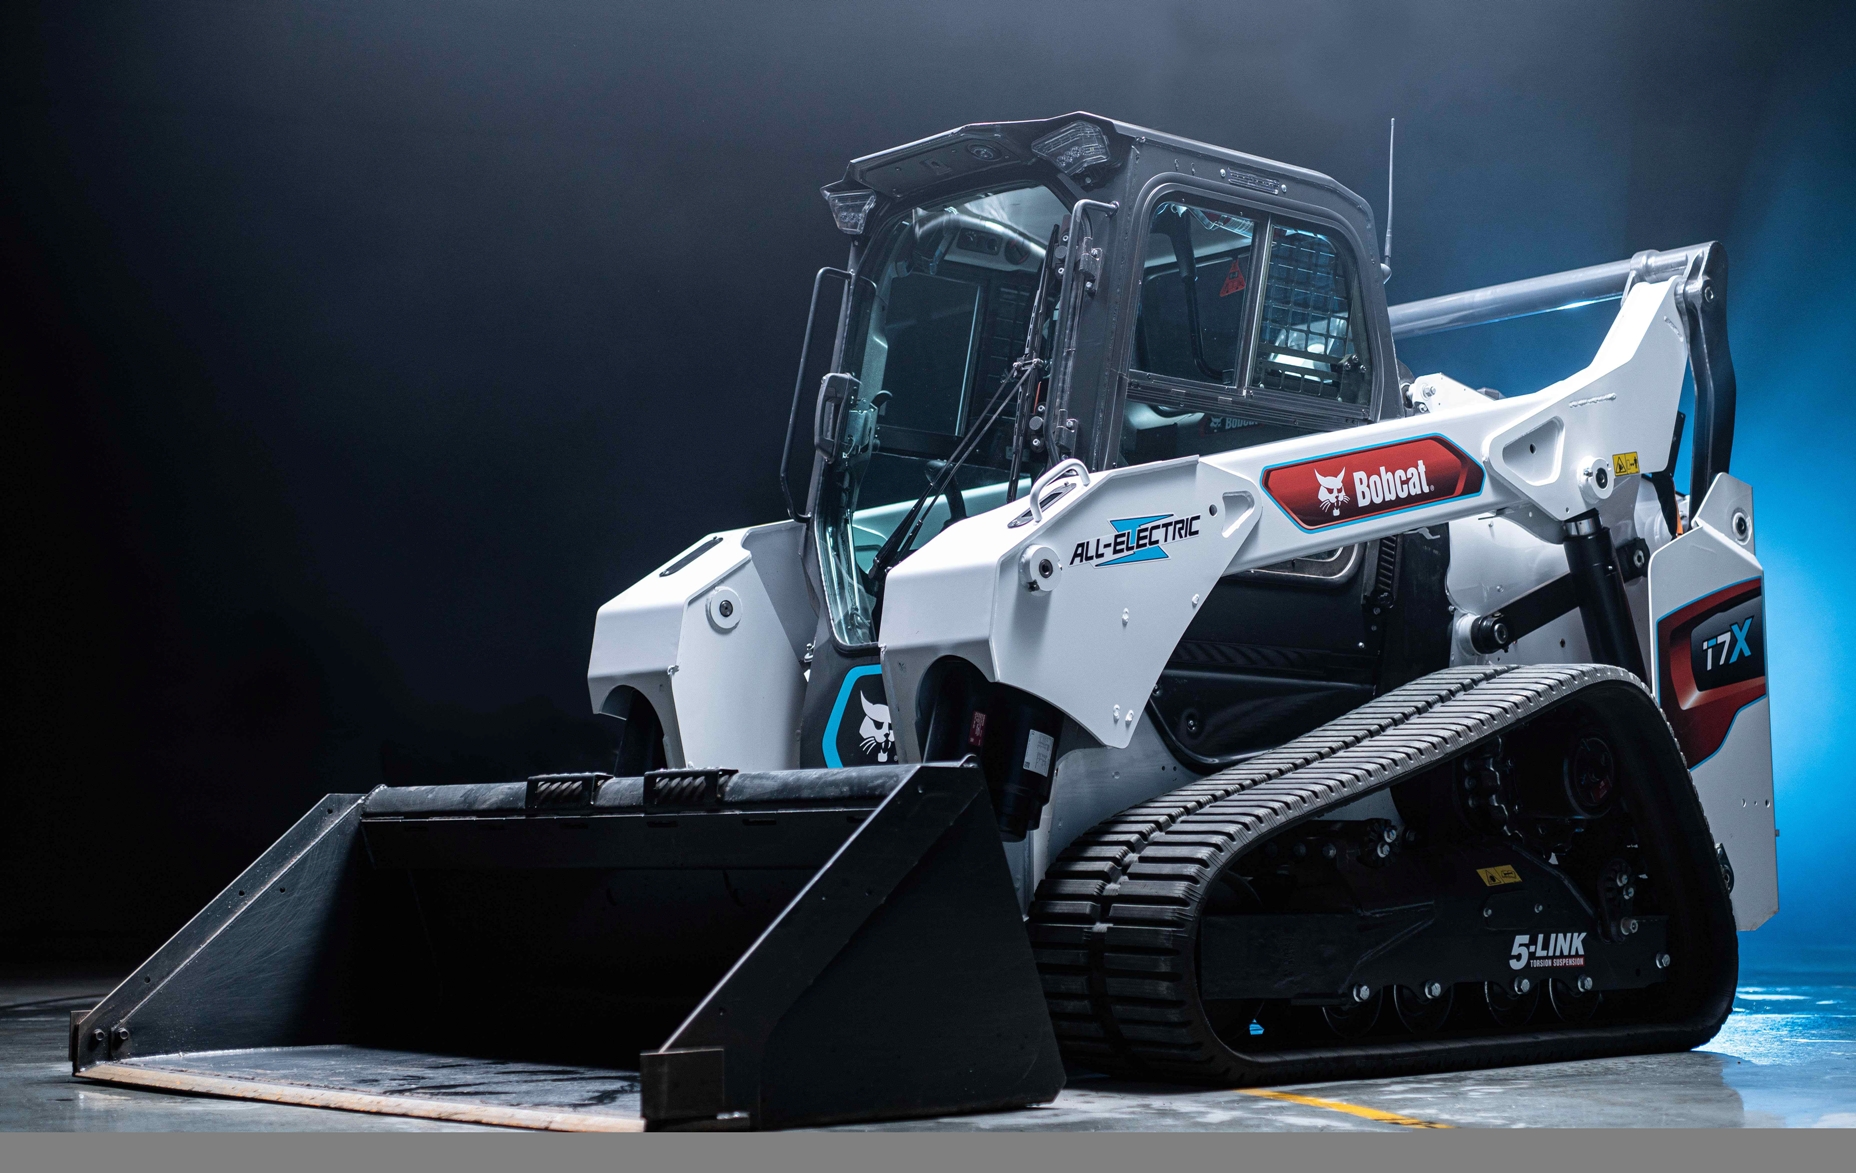 The Bobcat V7X is an electric construction vehicle that has no hydraulic actuators